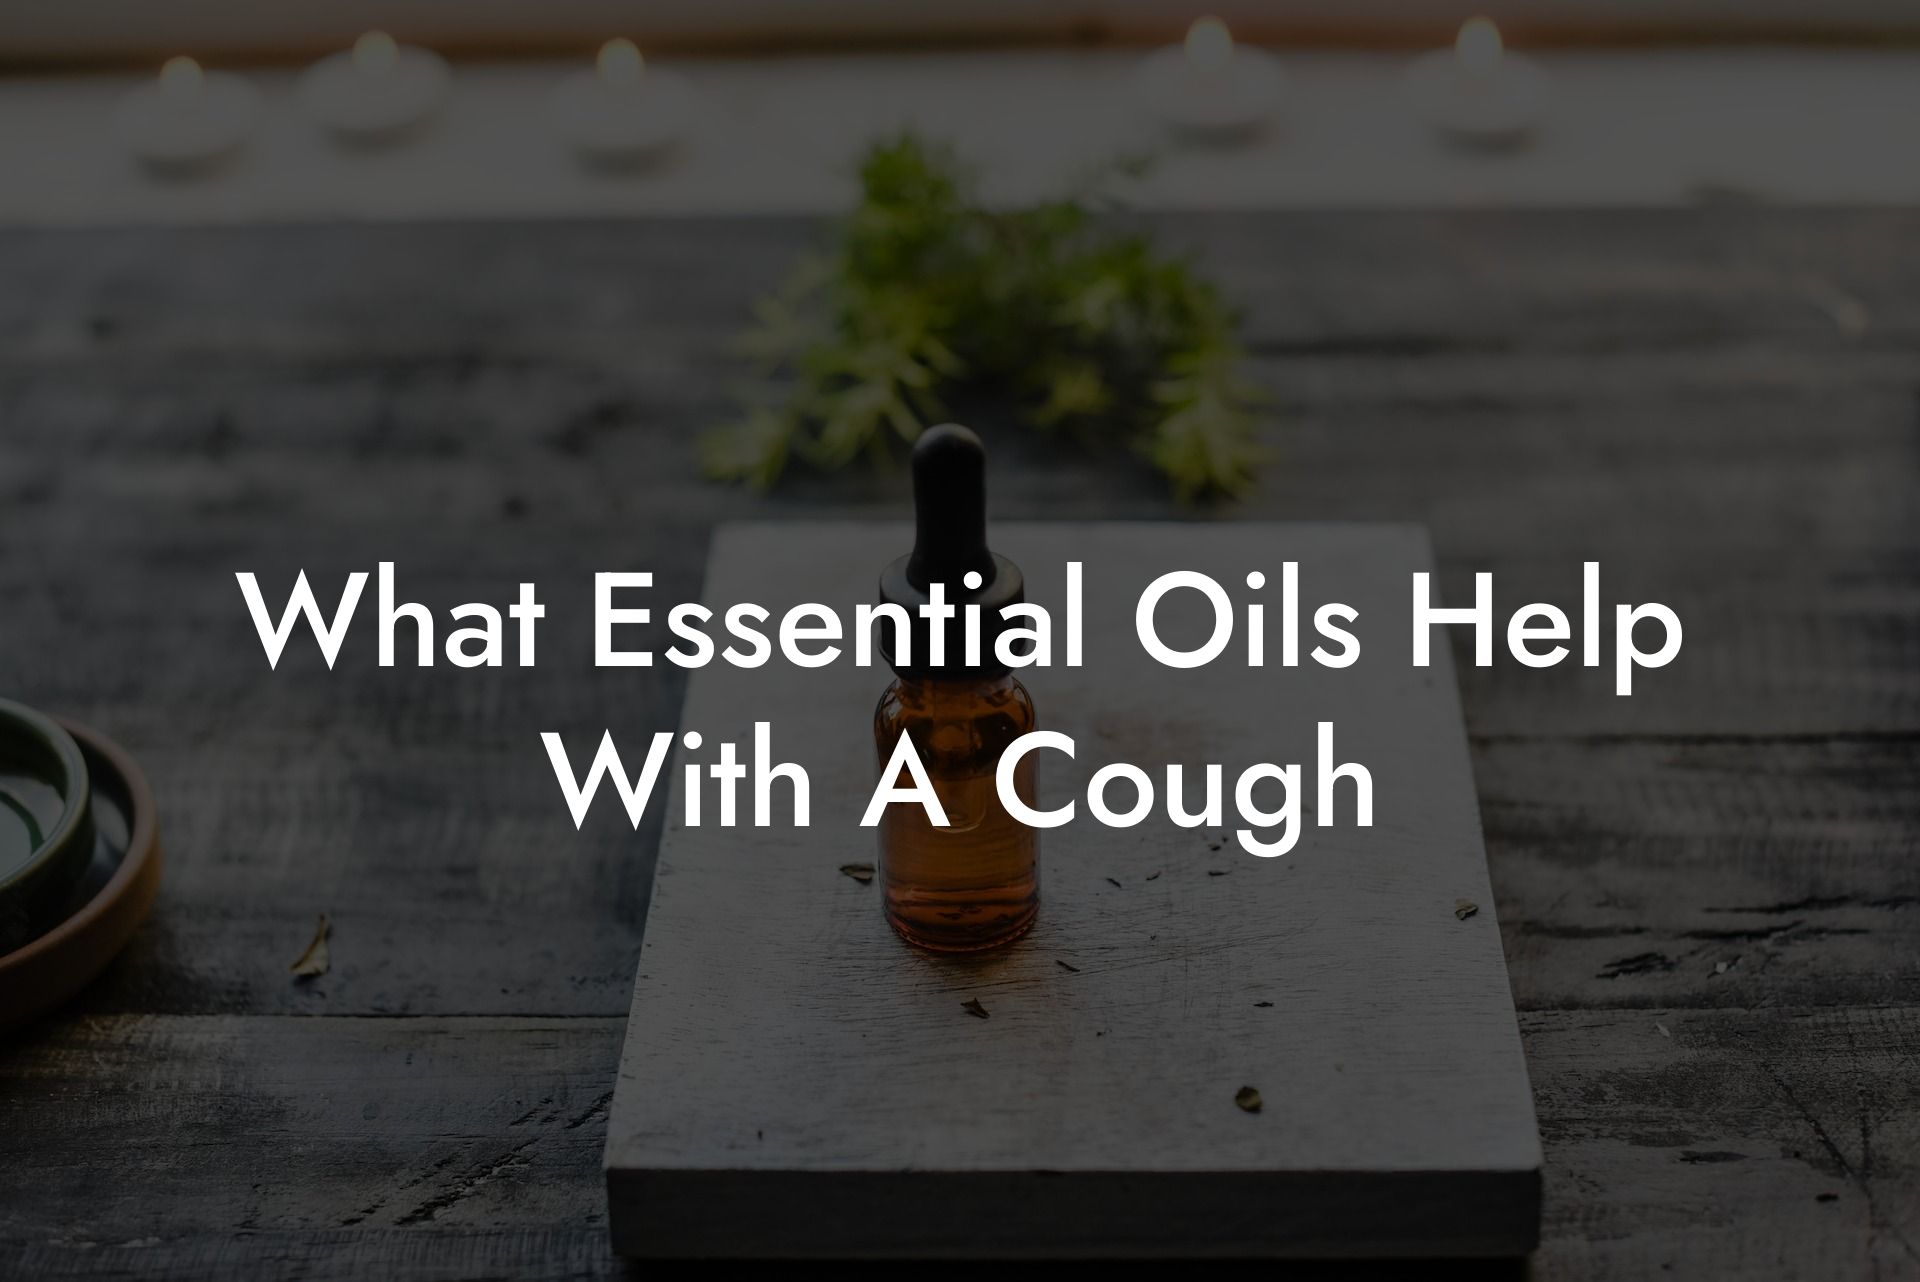 What Essential Oils Help With A Cough